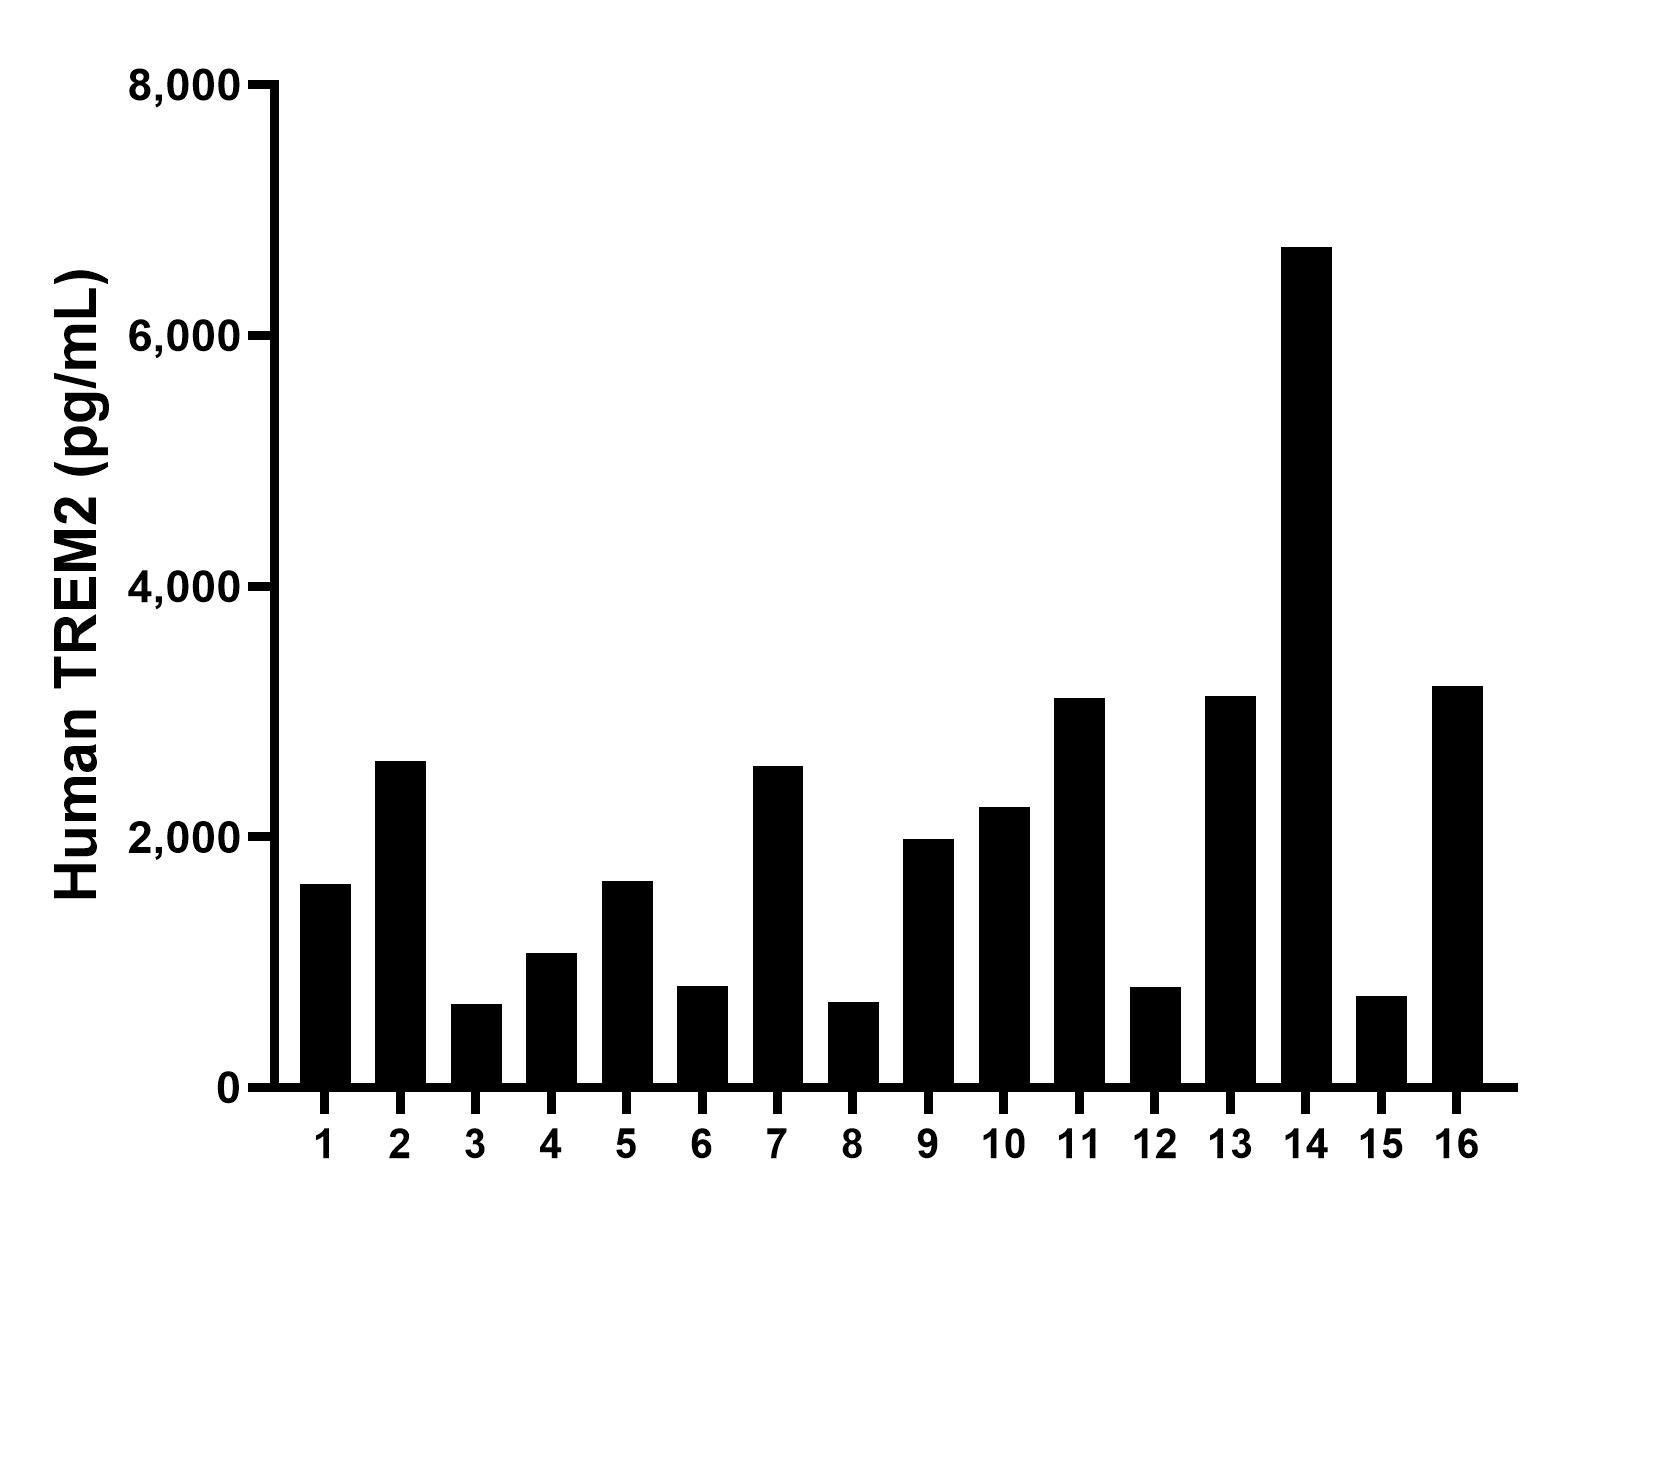 Serum of sixteen individual healthy human donors were measured. The human TREM2 concentration of detected samples was determined to be 2,096.2 pg/mL with a range of 661.9-6,705.0 pg/mL.